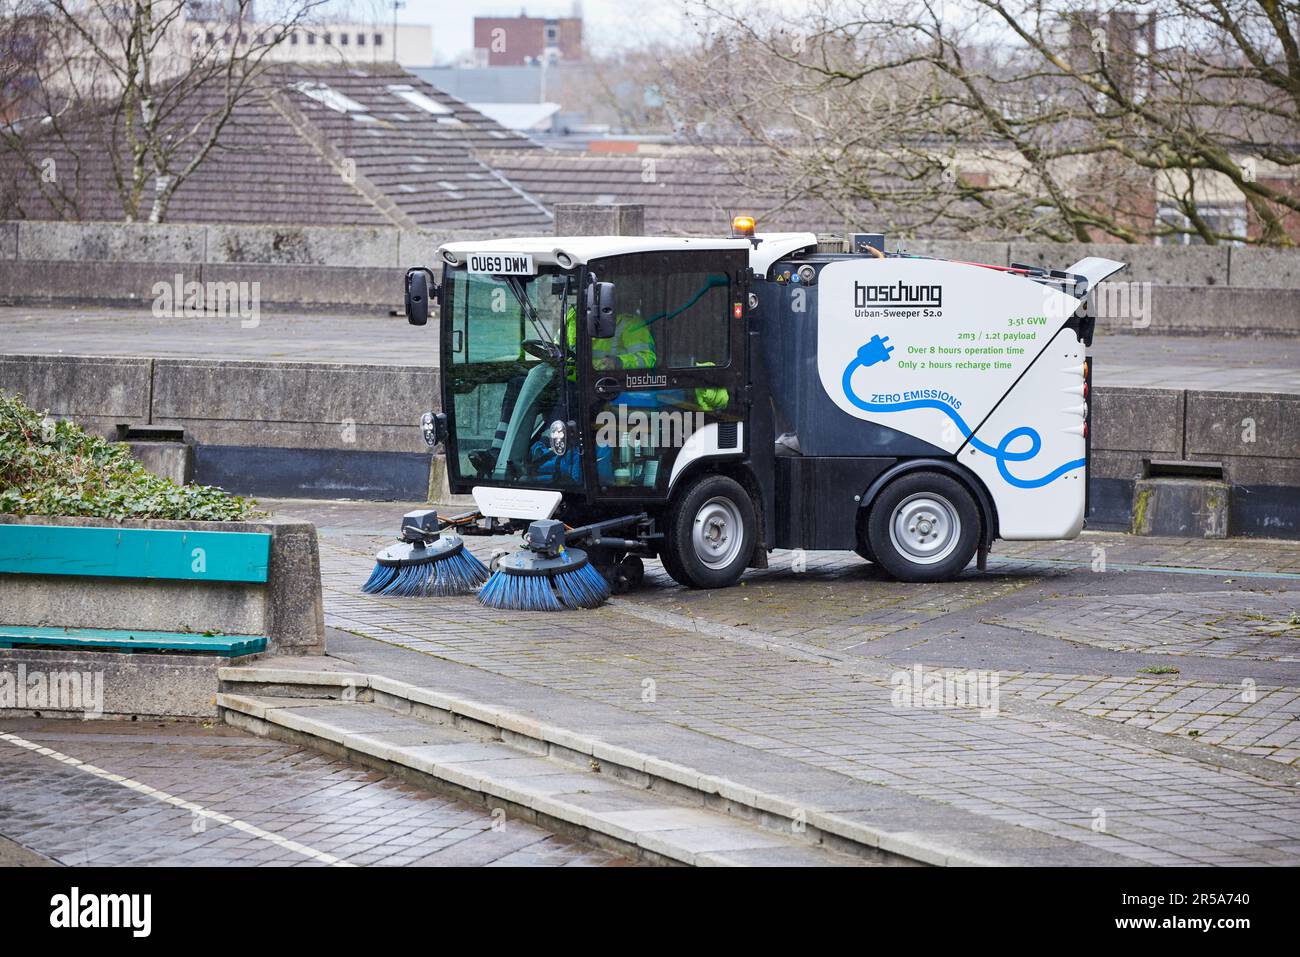 Electric small road sweeper Urban-Sweeper S2.0 electric powered promoting zero emissions Stock Photo